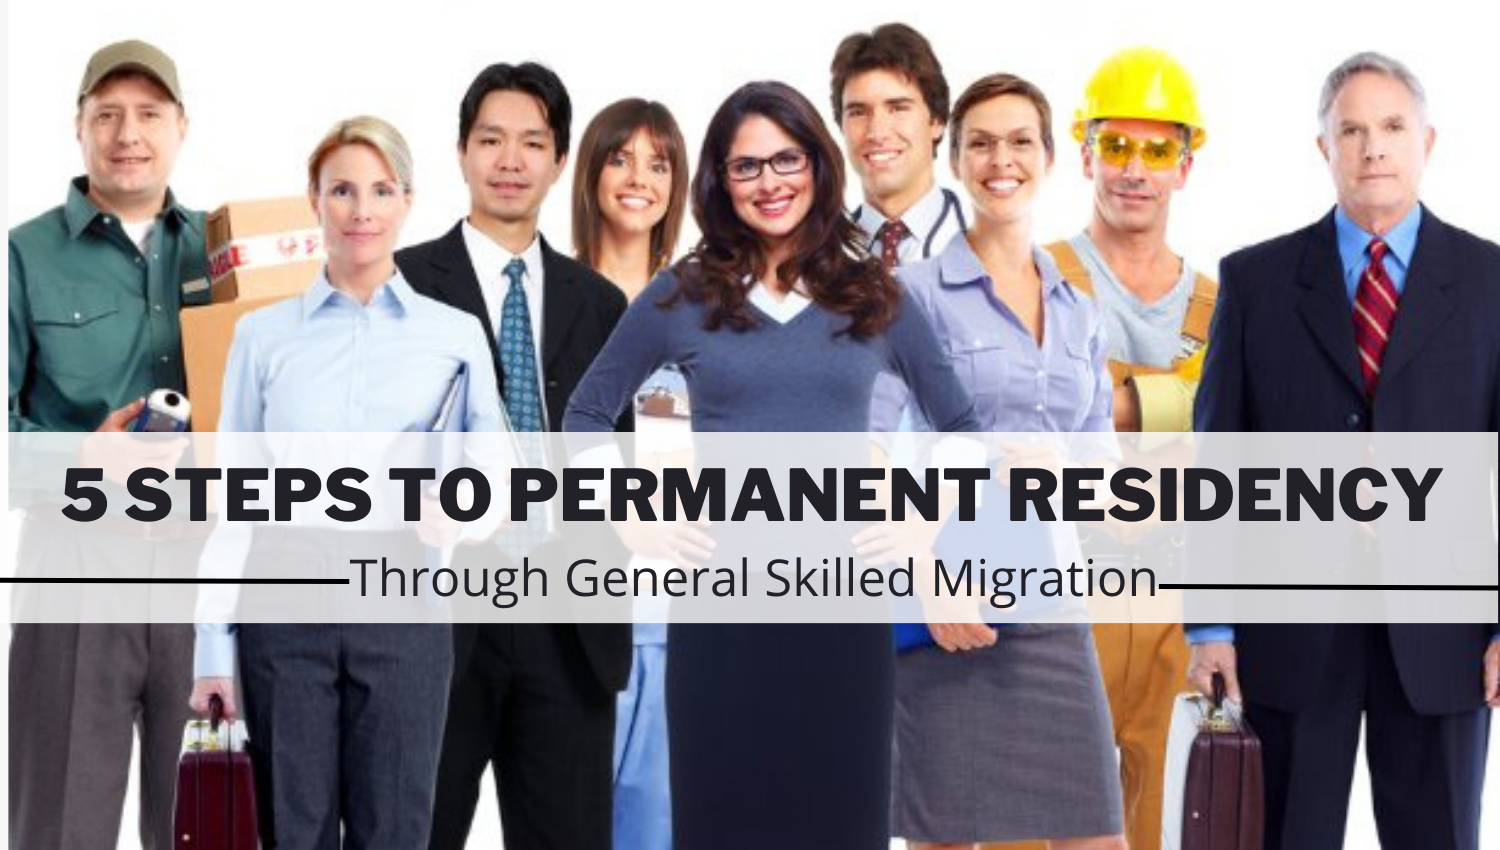 Steps to Permanent Residency